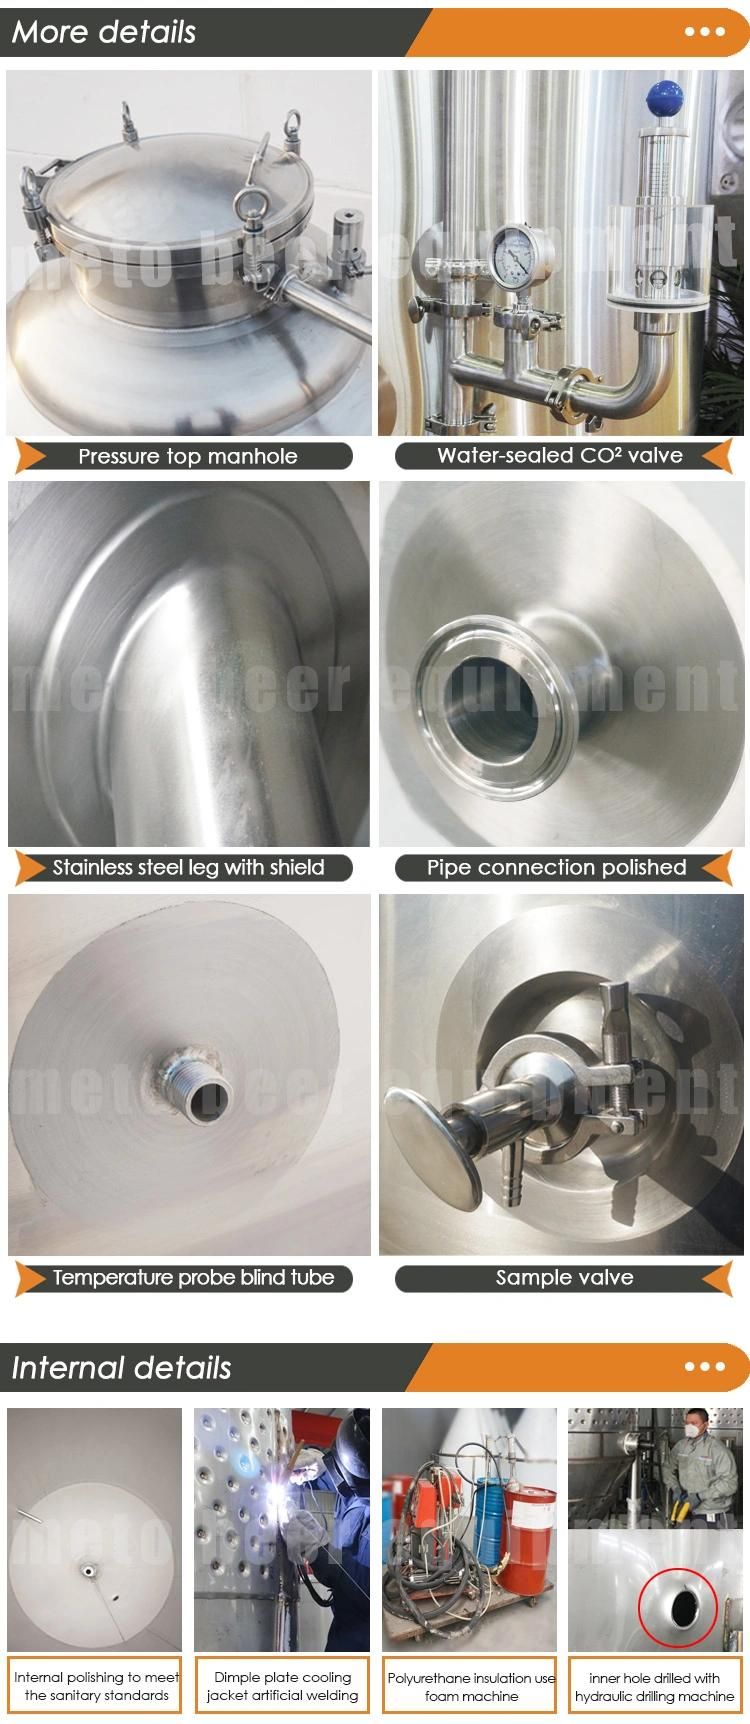 100L 200L 300L Stainless Steel Home Brew Conical Fermenter